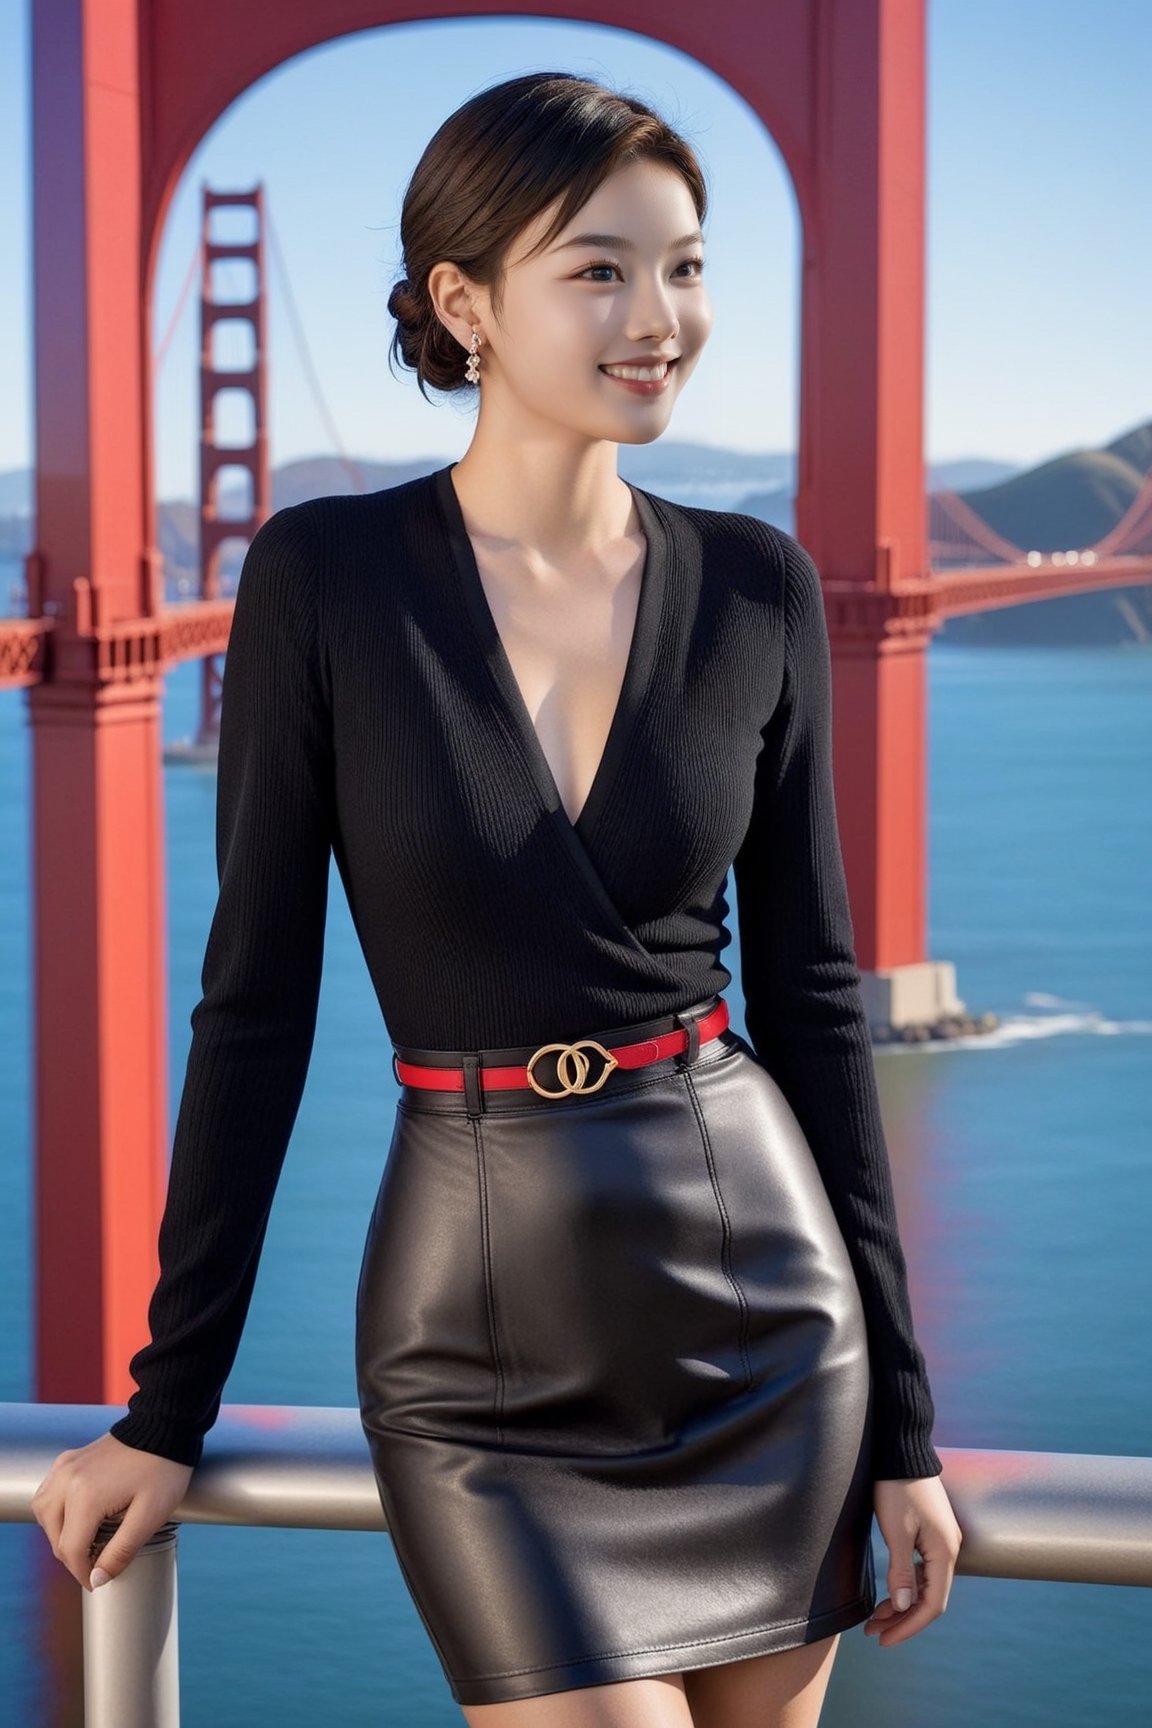 Hyper-Realistic photo of a girl,20yo,1girl,perfect female form,perfect body proportion,perfect anatomy,detailed exquisite face,soft shiny skin,smile,mesmerizing,short hair,small earrings,necklaces,elegant jacket,red color,louis vuitton
BREAK
backdrop of a beautiful golden gate bridge in San Francisco,ocean,(fullbody:1.3),(distant view:1.2),(heels:1.3),(model pose)
BREAK
(rule of thirds:1.3),perfect composition,studio photo,trending on artstation,(Masterpiece,Best quality,32k,UHD:1.5),(sharp focus,high contrast,HDR,hyper-detailed,intricate details,ultra-realistic,award-winning photo,ultra-clear,kodachrome 800:1.3),(chiaroscuro lighting,soft rim lighting:1.2),by Karol Bak,Antonio Lopez,Gustav Klimt and Hayao Miyazaki,photo_b00ster,real_booster,ani_booster,kim youjung